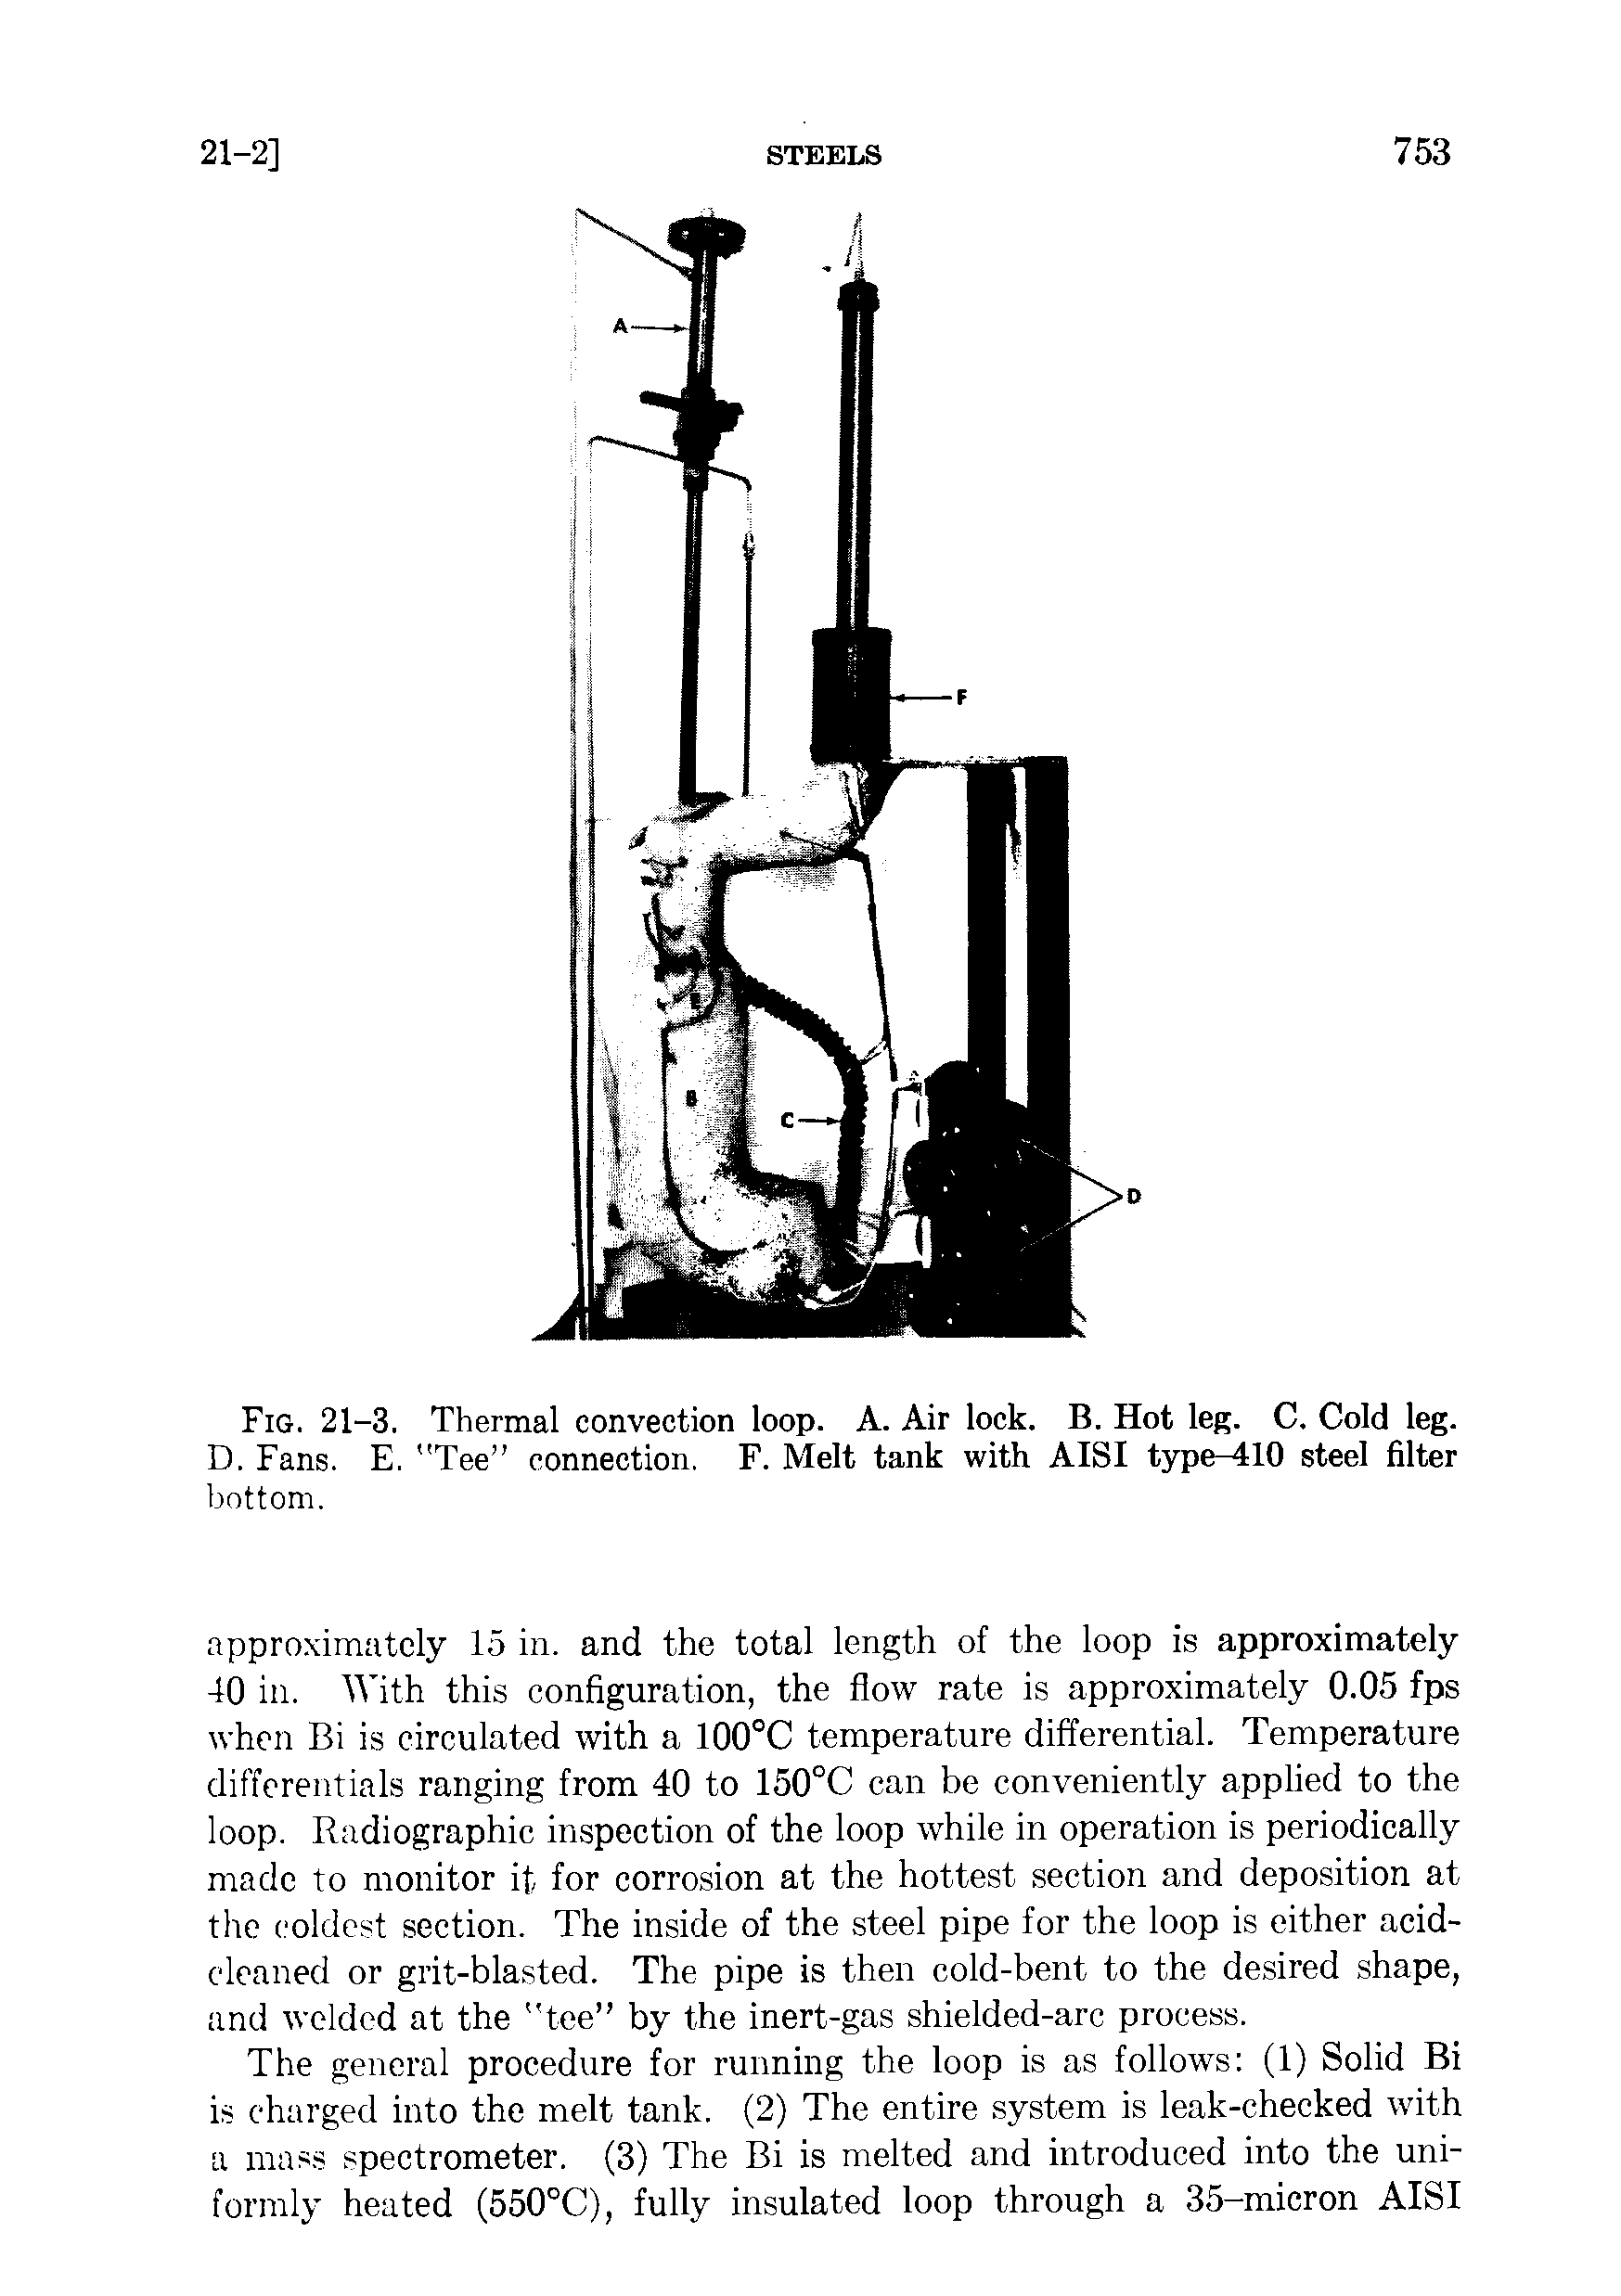 Fig. 21-3, Thermal convection loop. A. Air lock. B. Hot leg. C. Cold leg. D. Fans. E. "Tee connection. F. Melt tank with AISI t5rpe I0 steel filter...